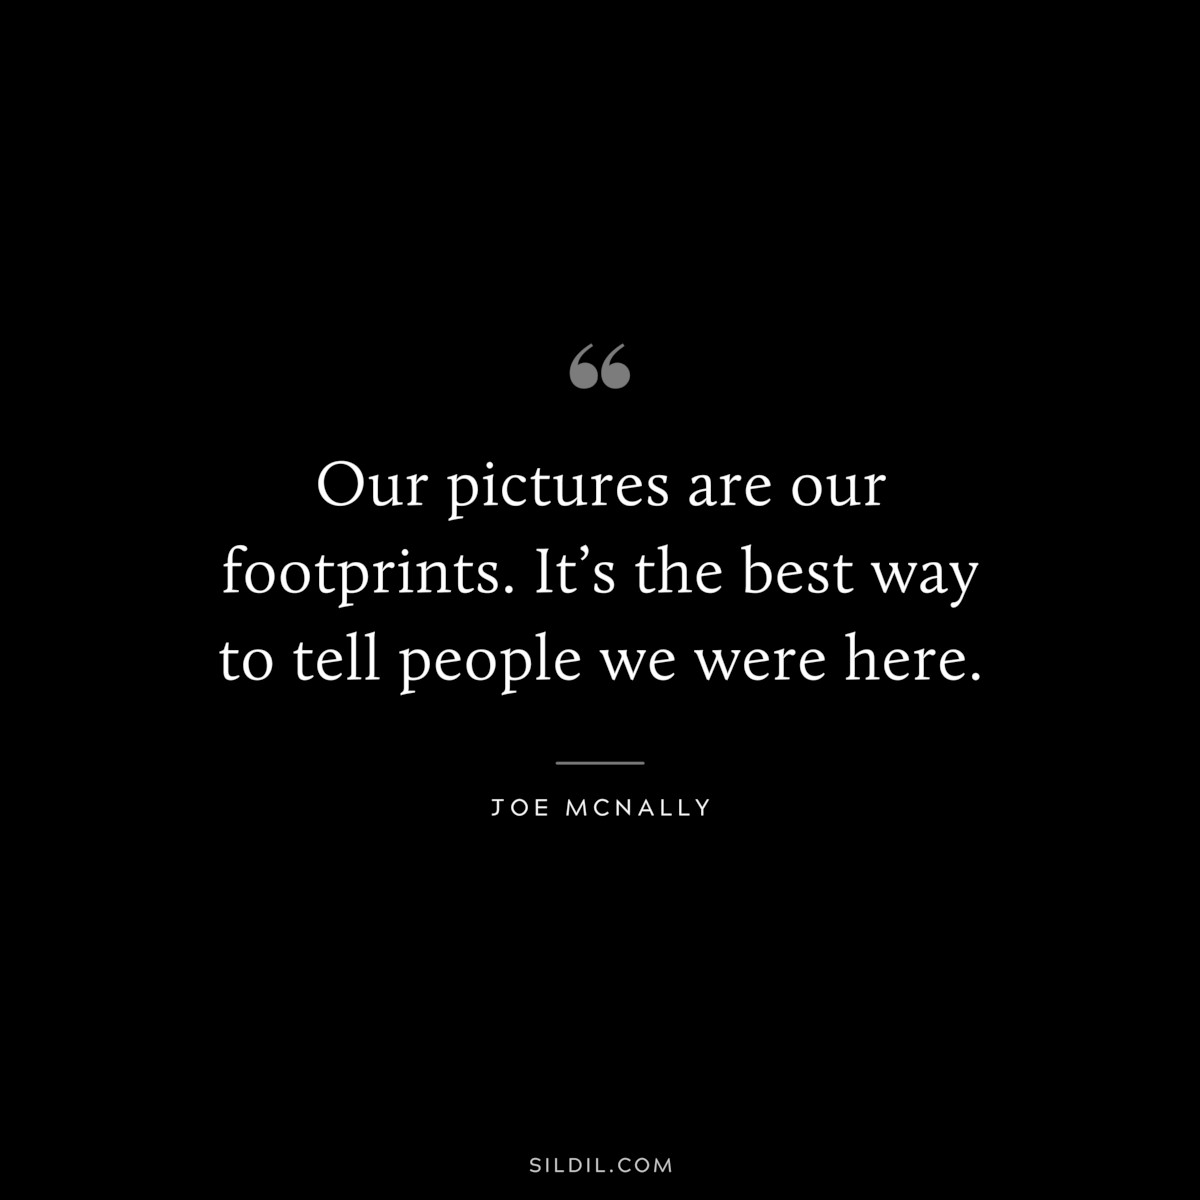 Our pictures are our footprints. It’s the best way to tell people we were here. ― Joe McNally